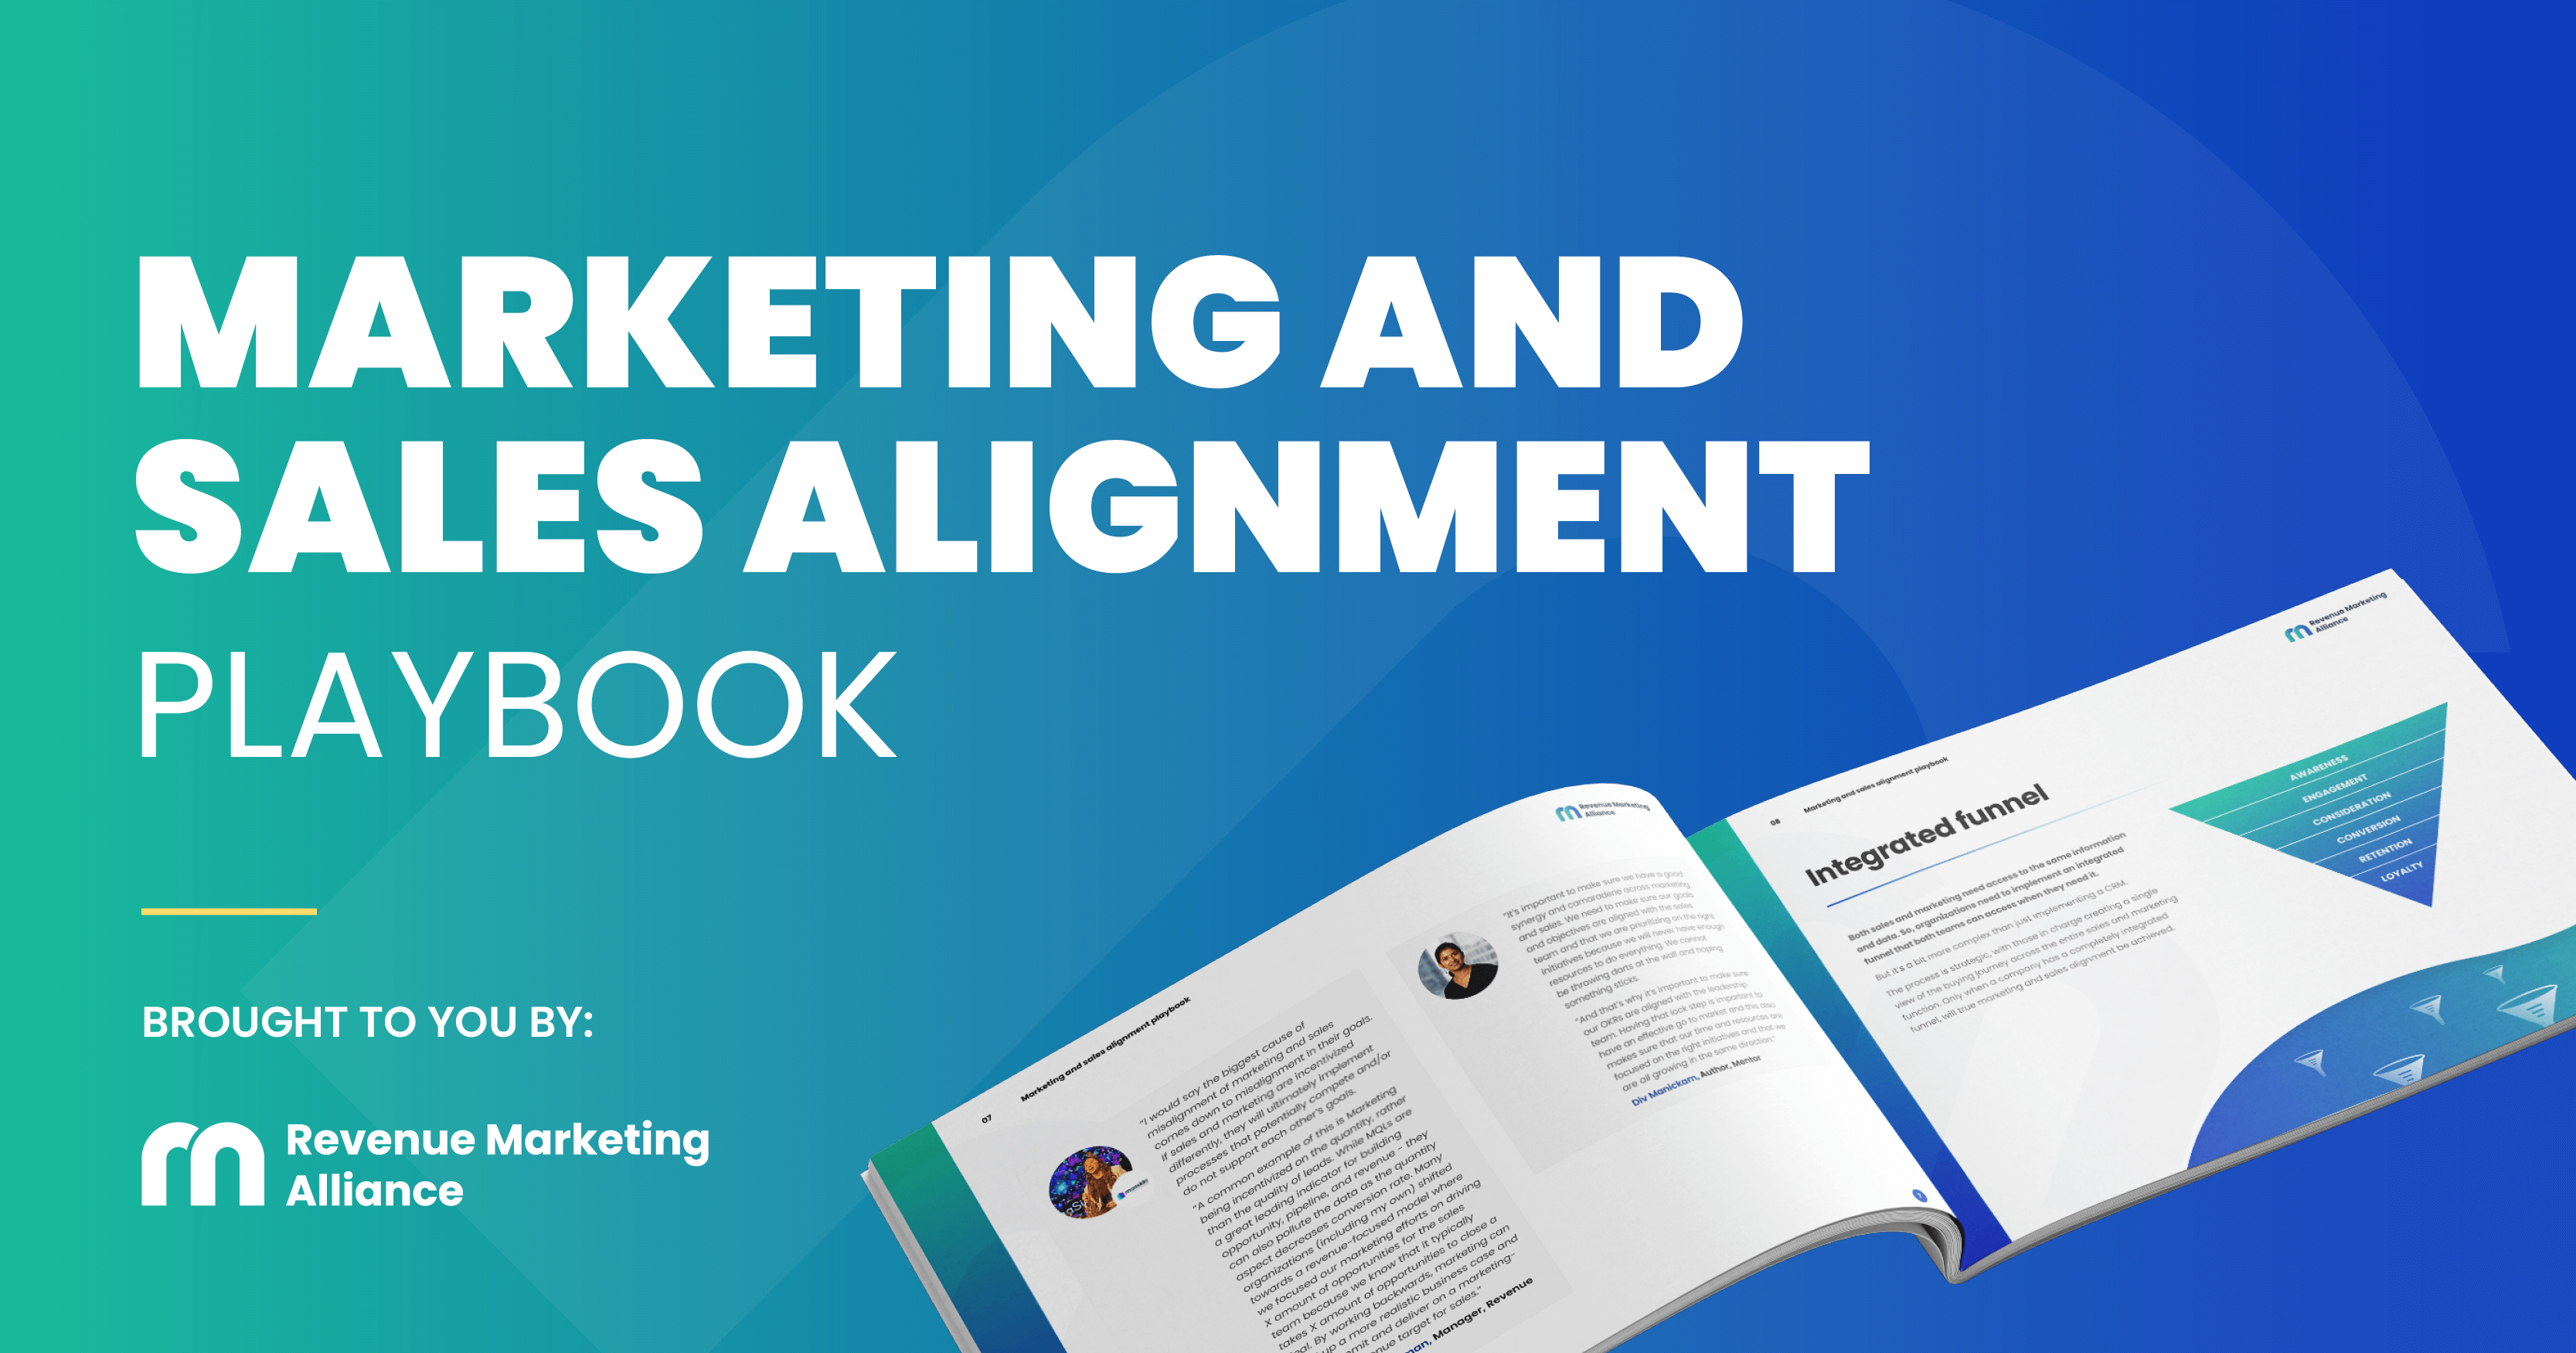 Marketing and sales alignment playbook.